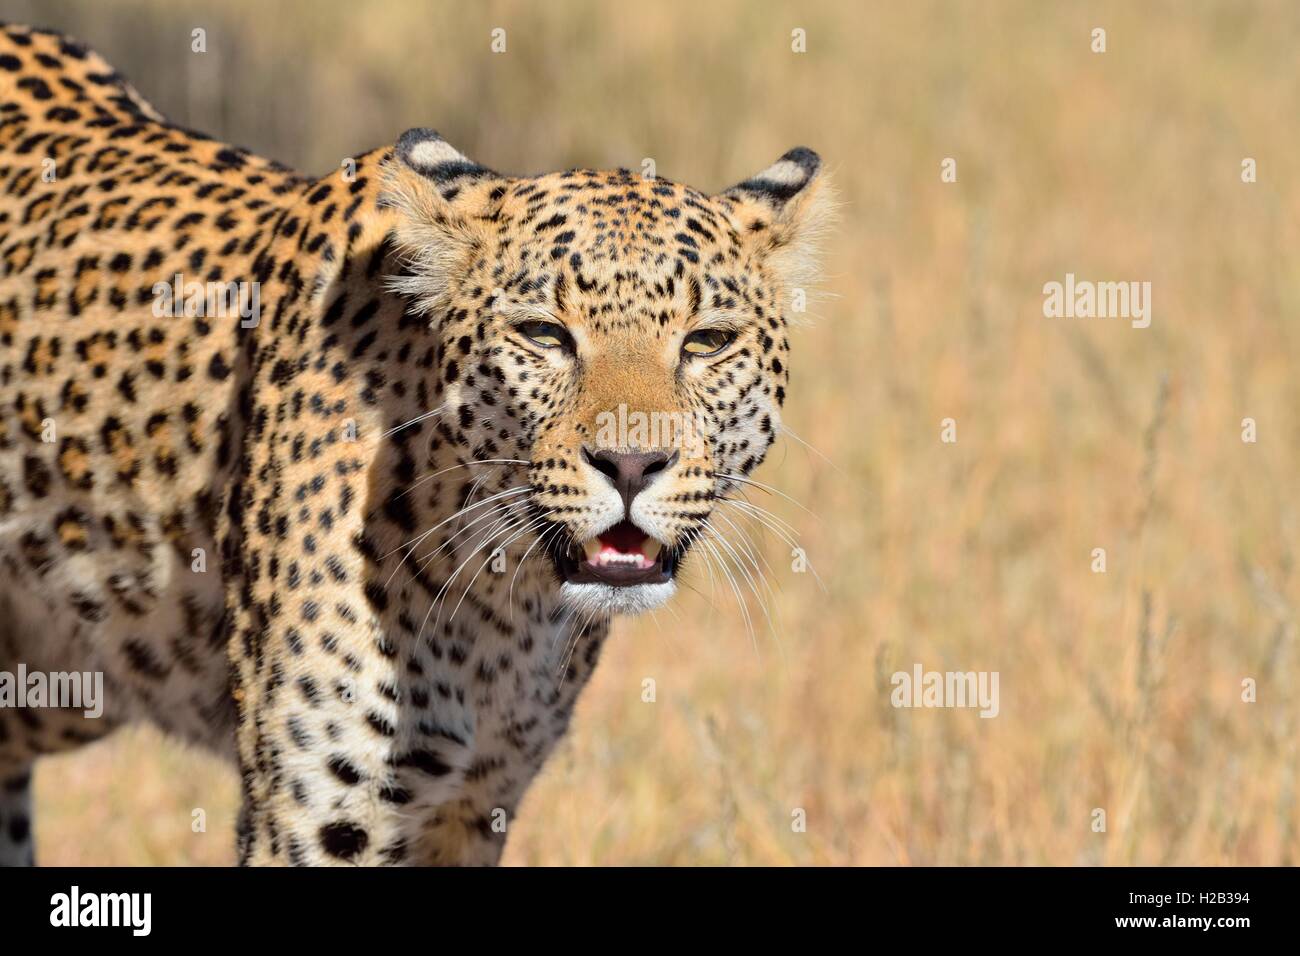 Leopard (Panthera pardus), walking, Kgalagadi Transfrontier Park, Northern Cape, South Africa, Africa Stock Photo